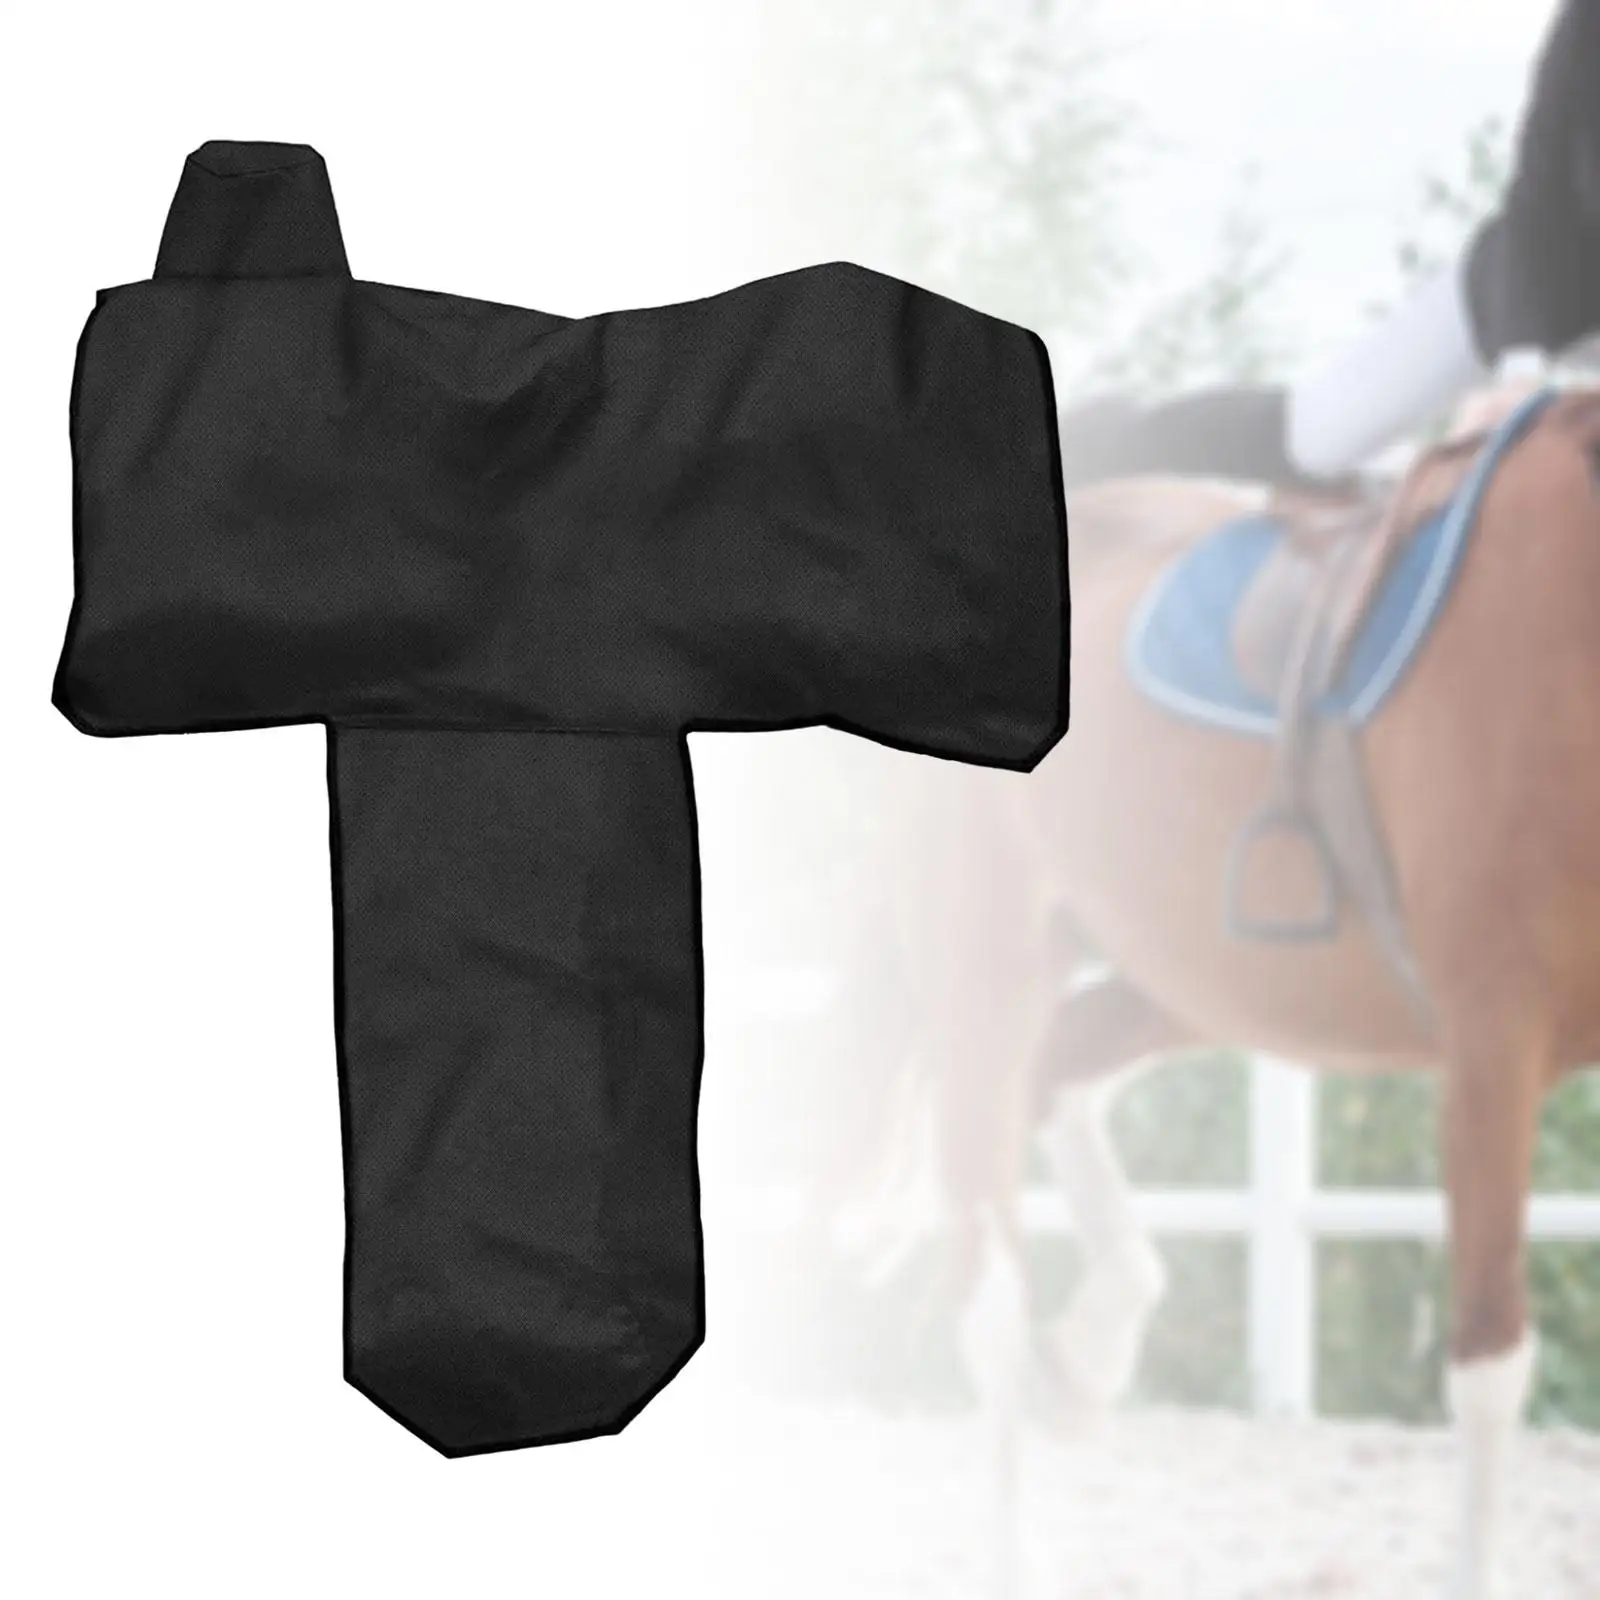 Saddle Covers Western Waterproof Oxford Cloth Black Protection Saddle Carrier Saddle Carrying Bag for Western Saddles